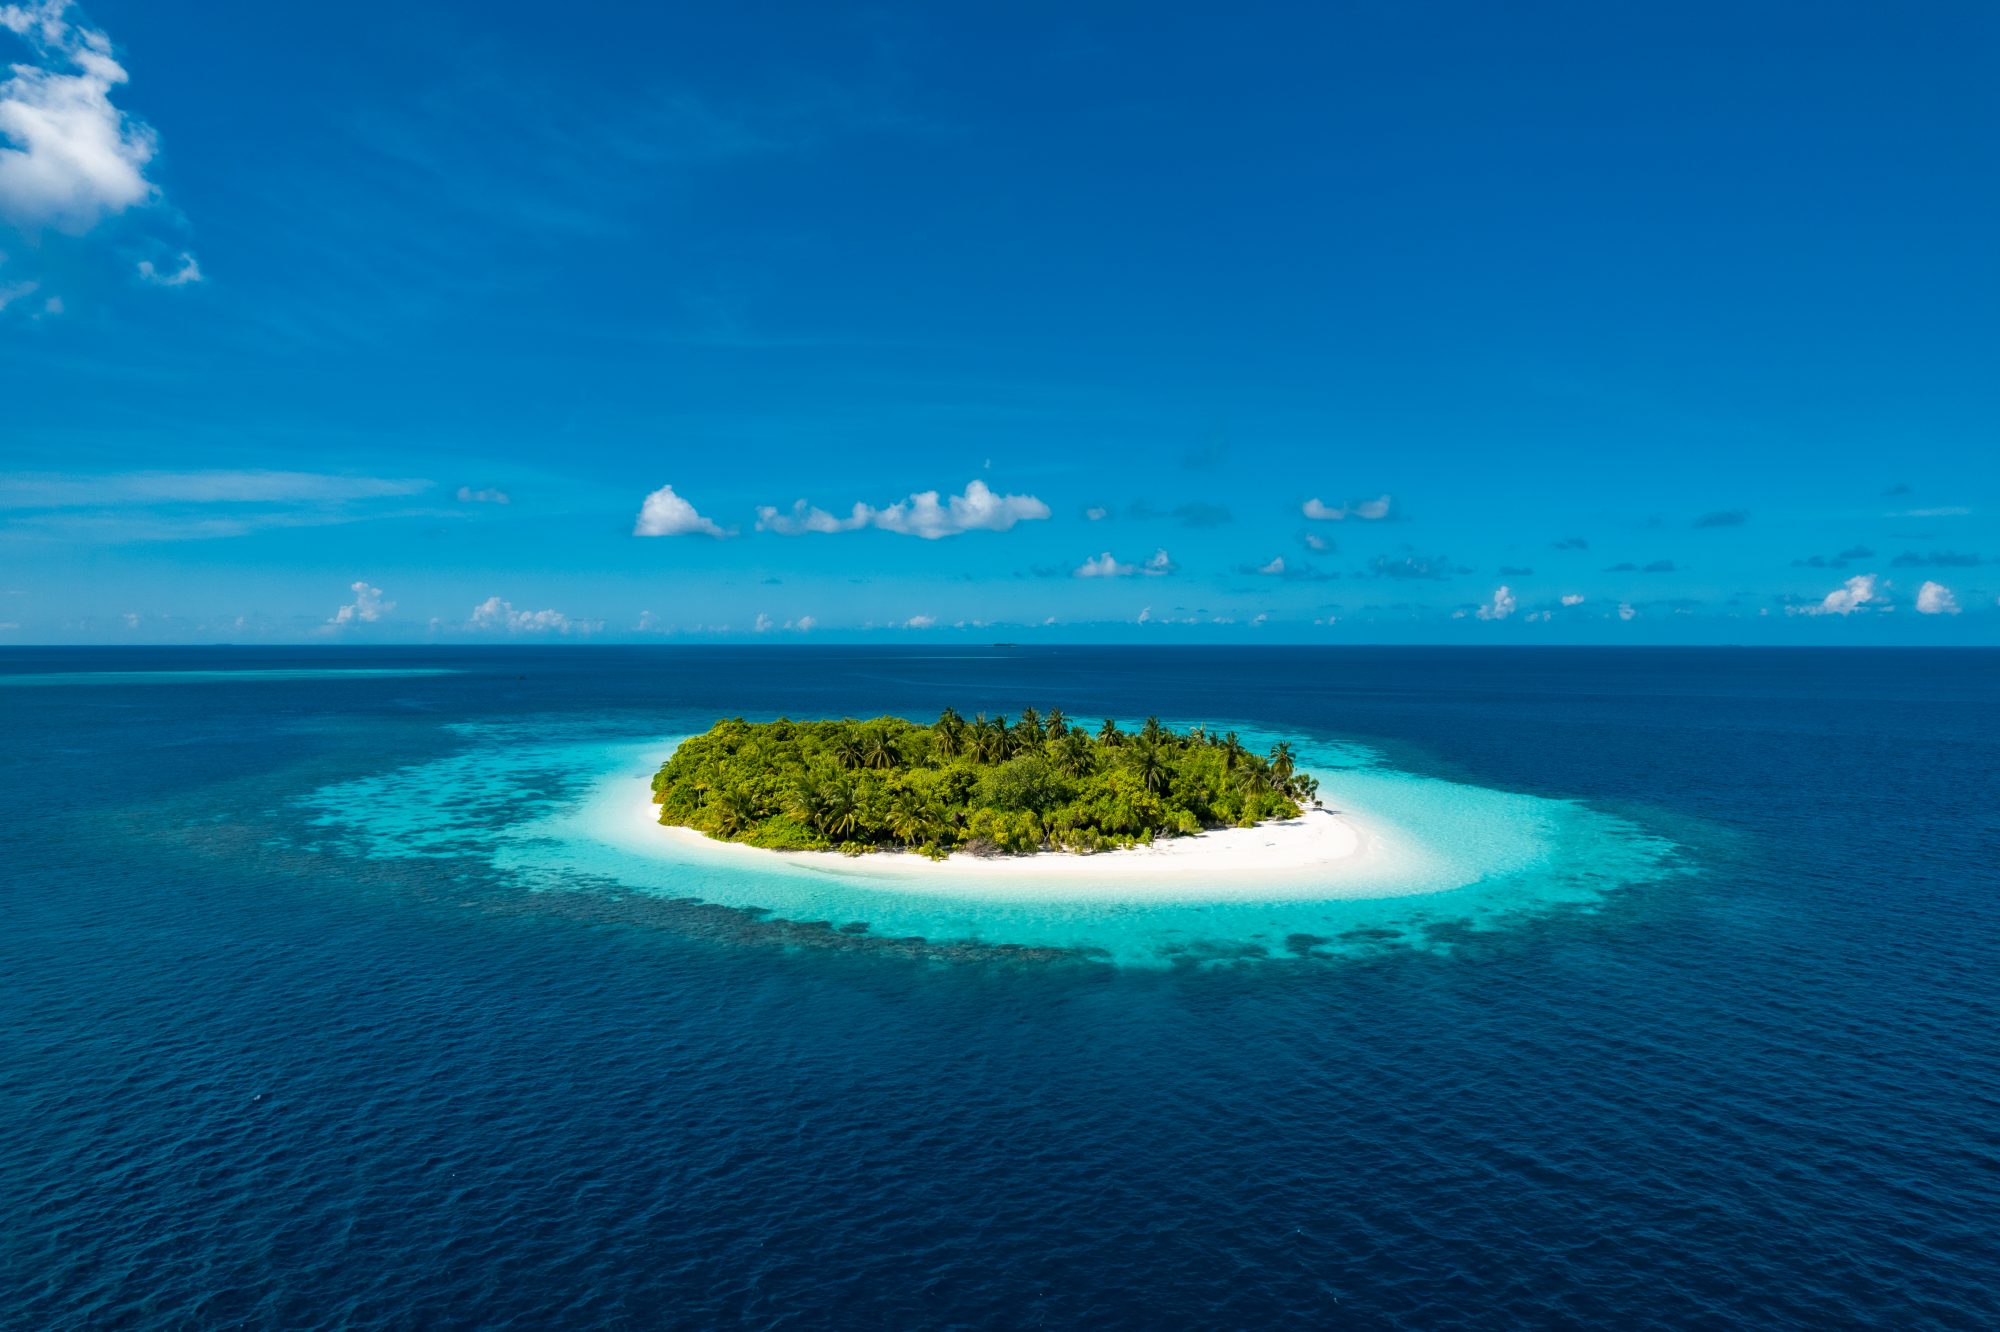 Isolated tropical island middle of ocean